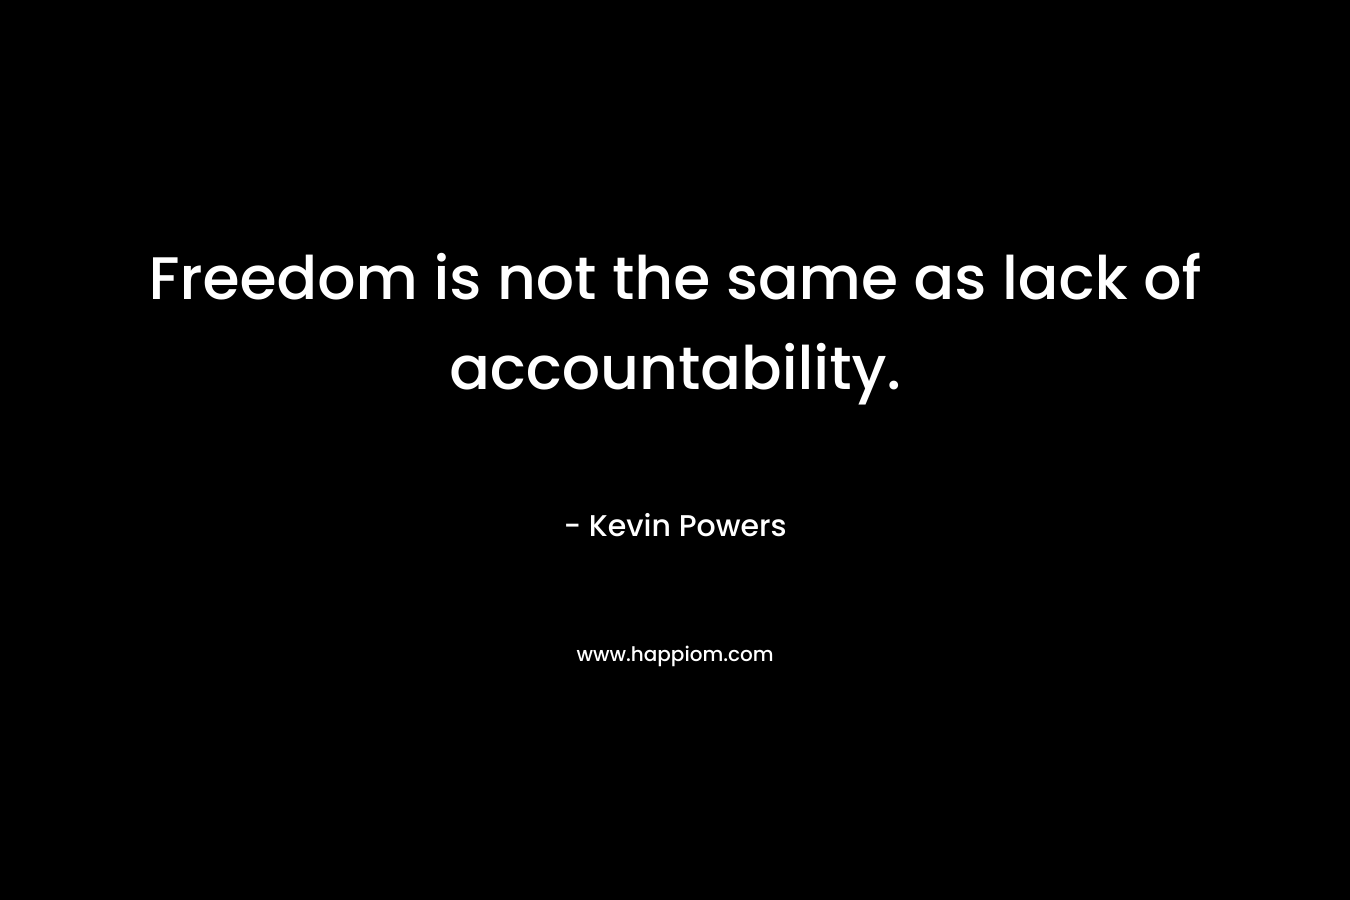 Freedom is not the same as lack of accountability. – Kevin Powers